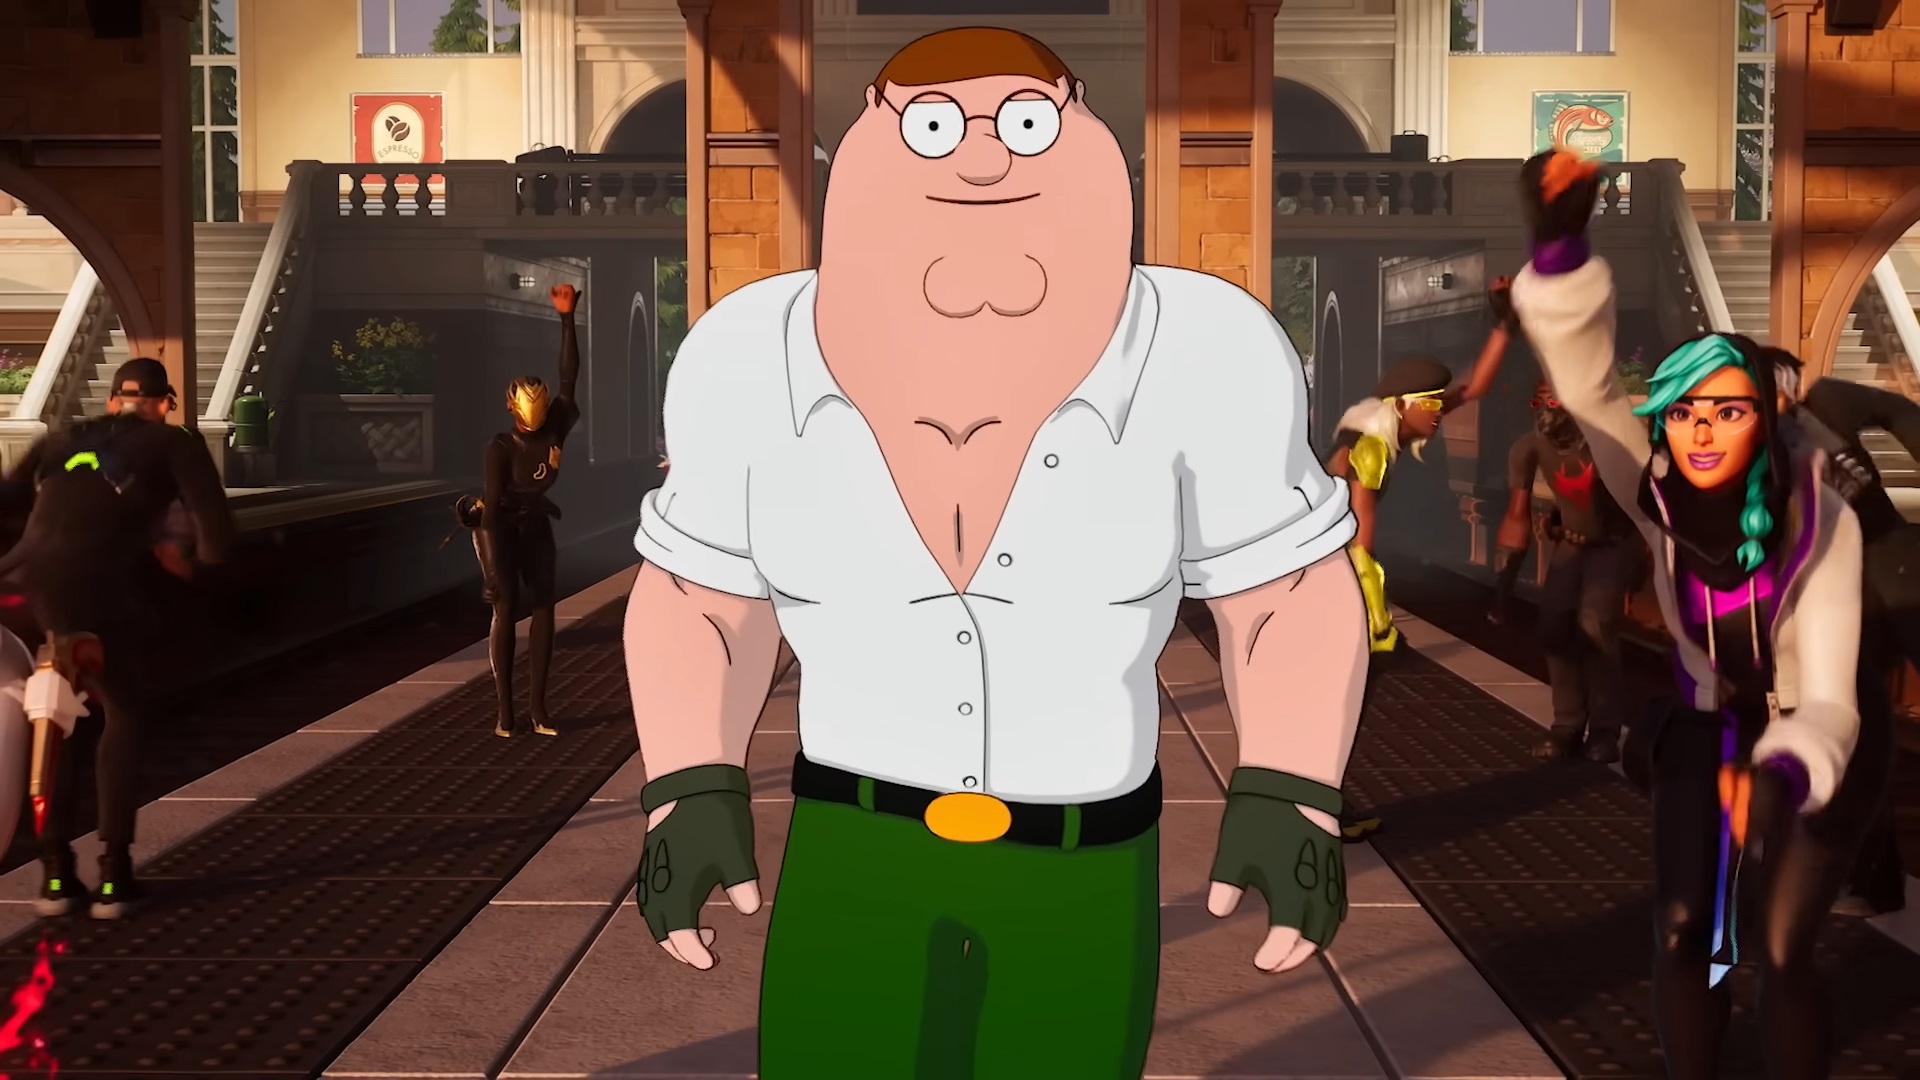  'It took a while, we know': Epic Games is introducing a first-person camera to Fortnite, which I'll probably just use to look at all the Peter Griffin skins  